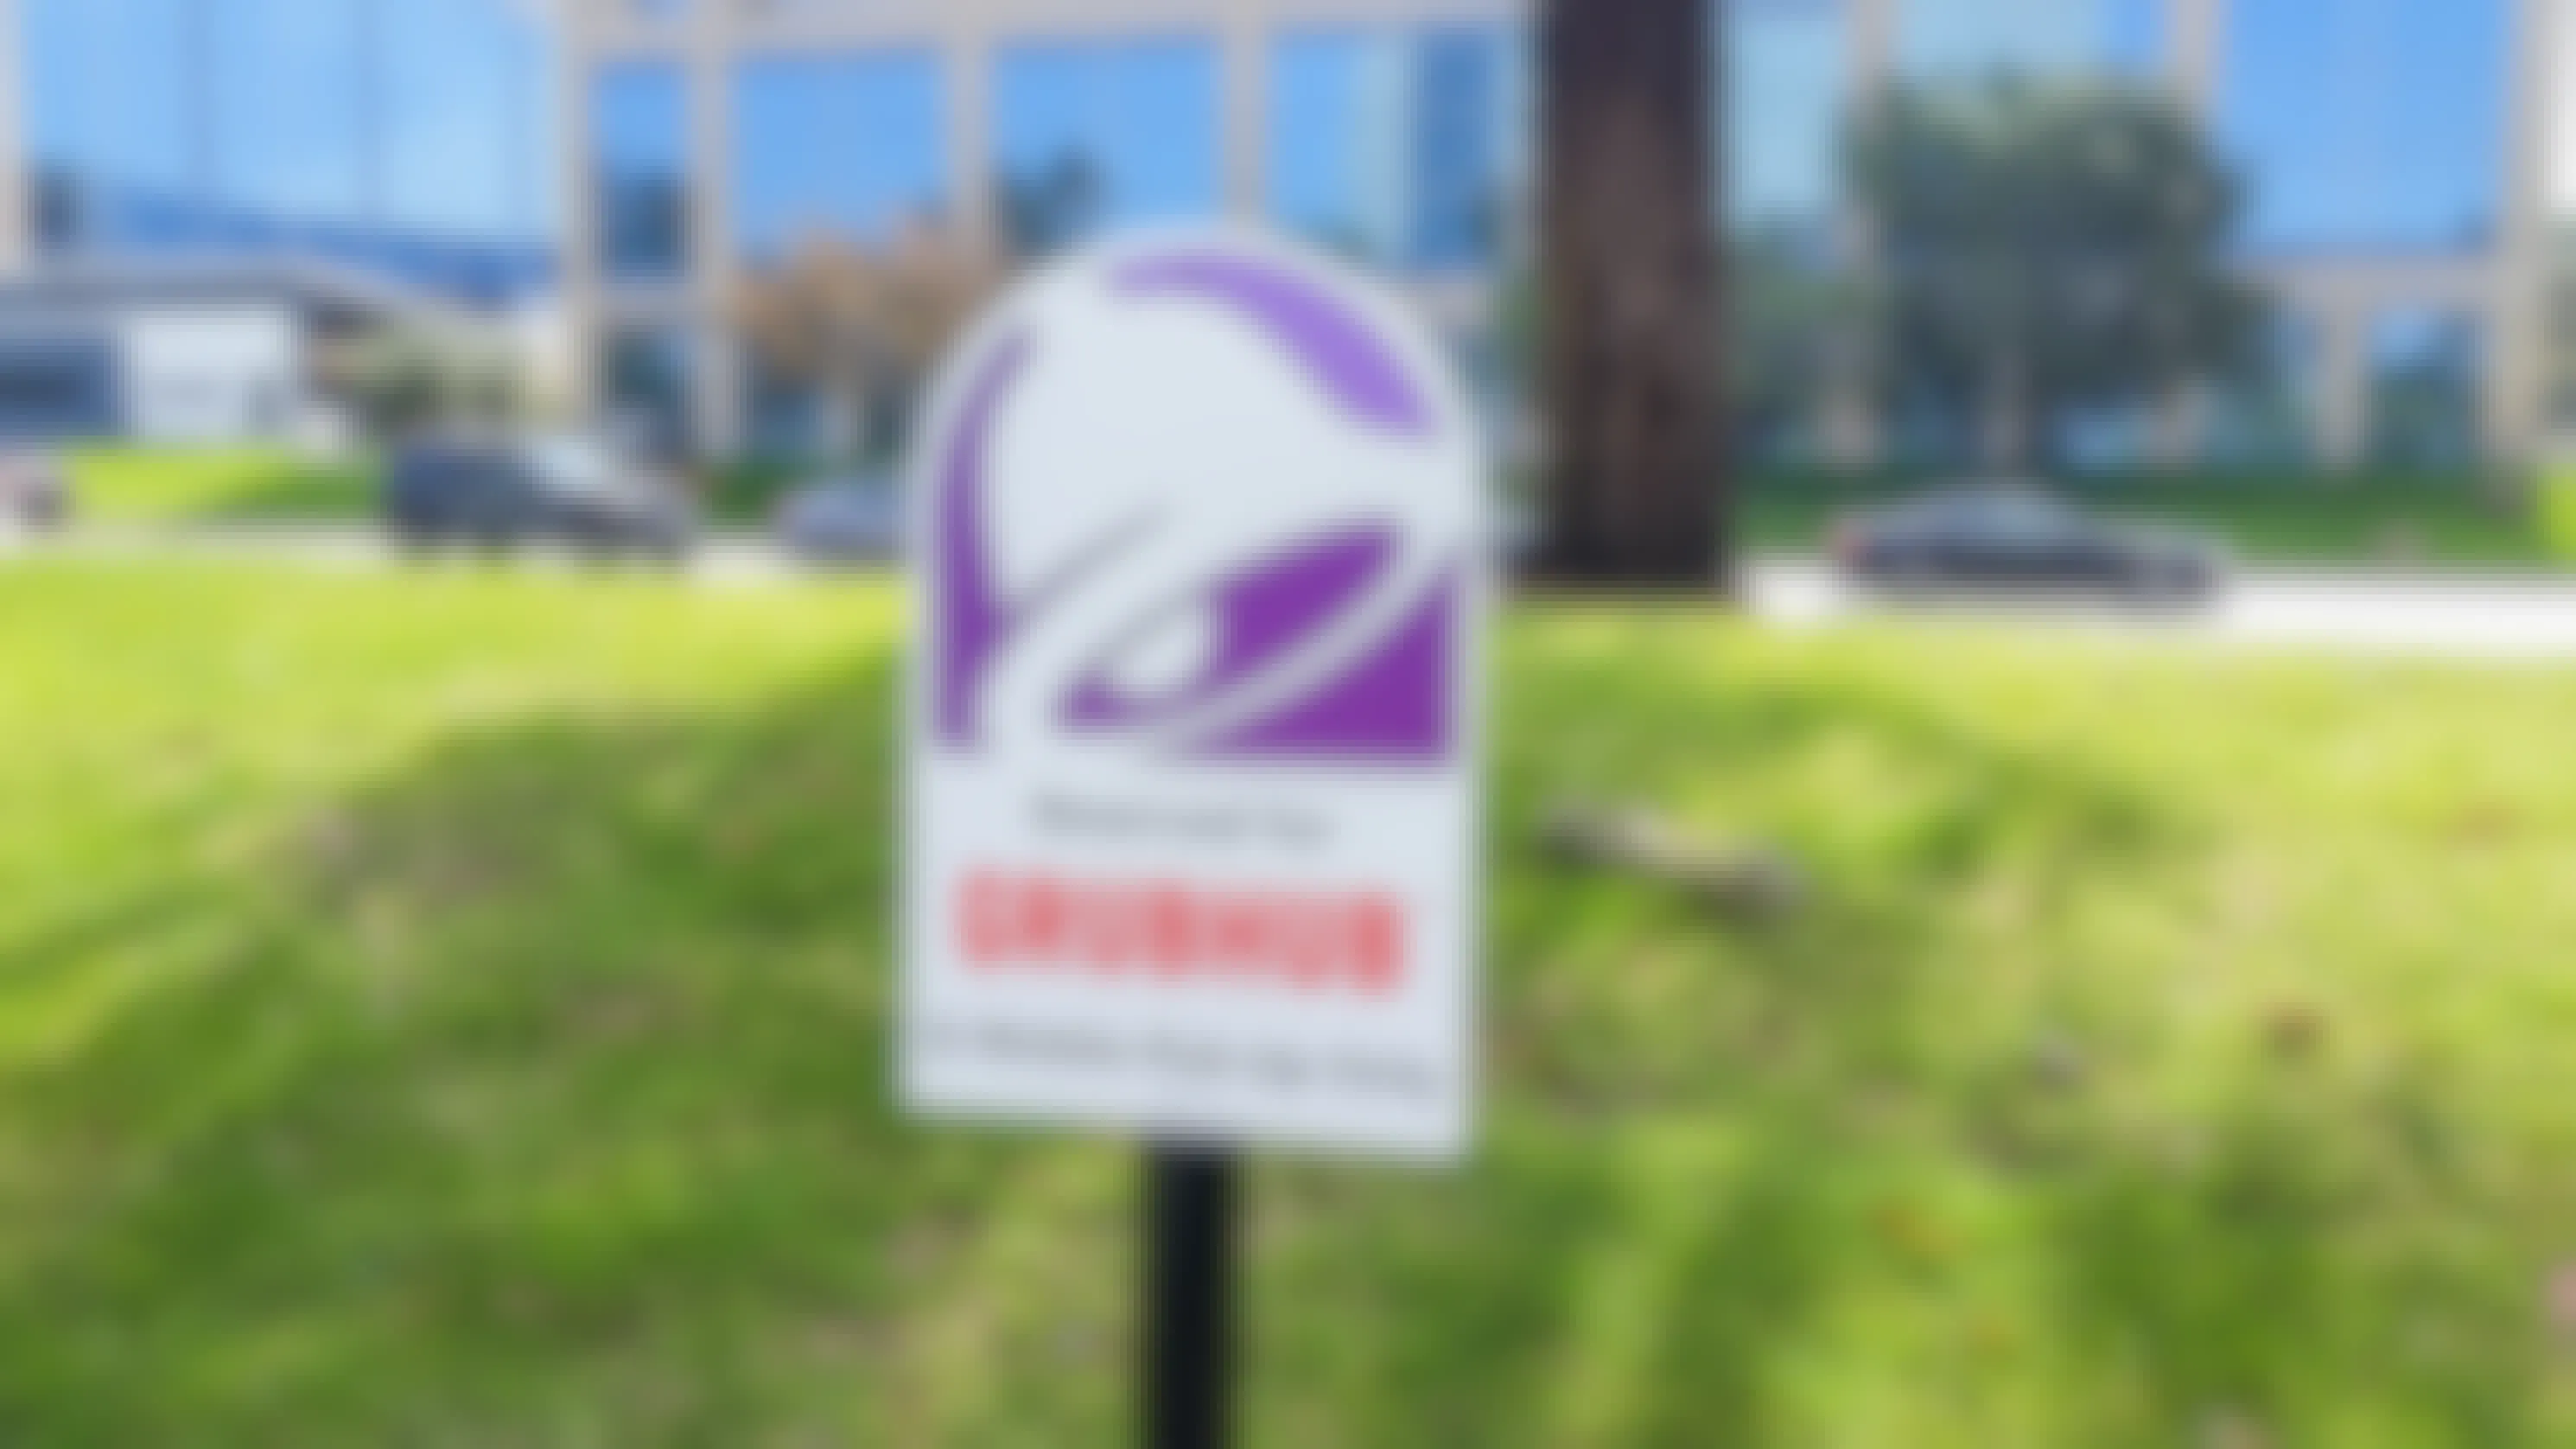 - A Taco Bell sign positioned at a parking space. The sign has the Taco Bell logo and reads 